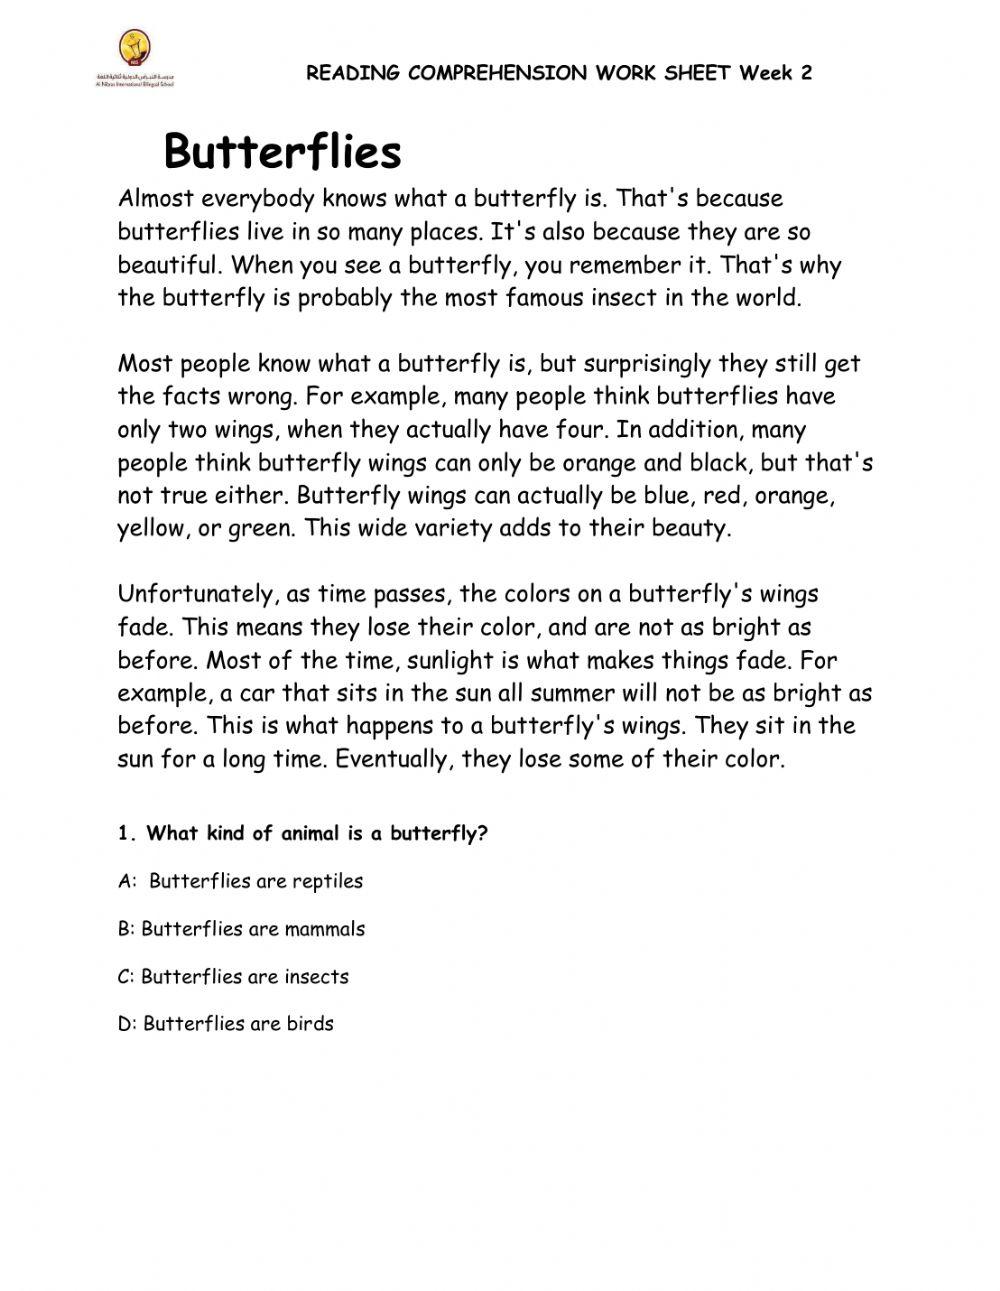 Butterflies-Reading Comprehension